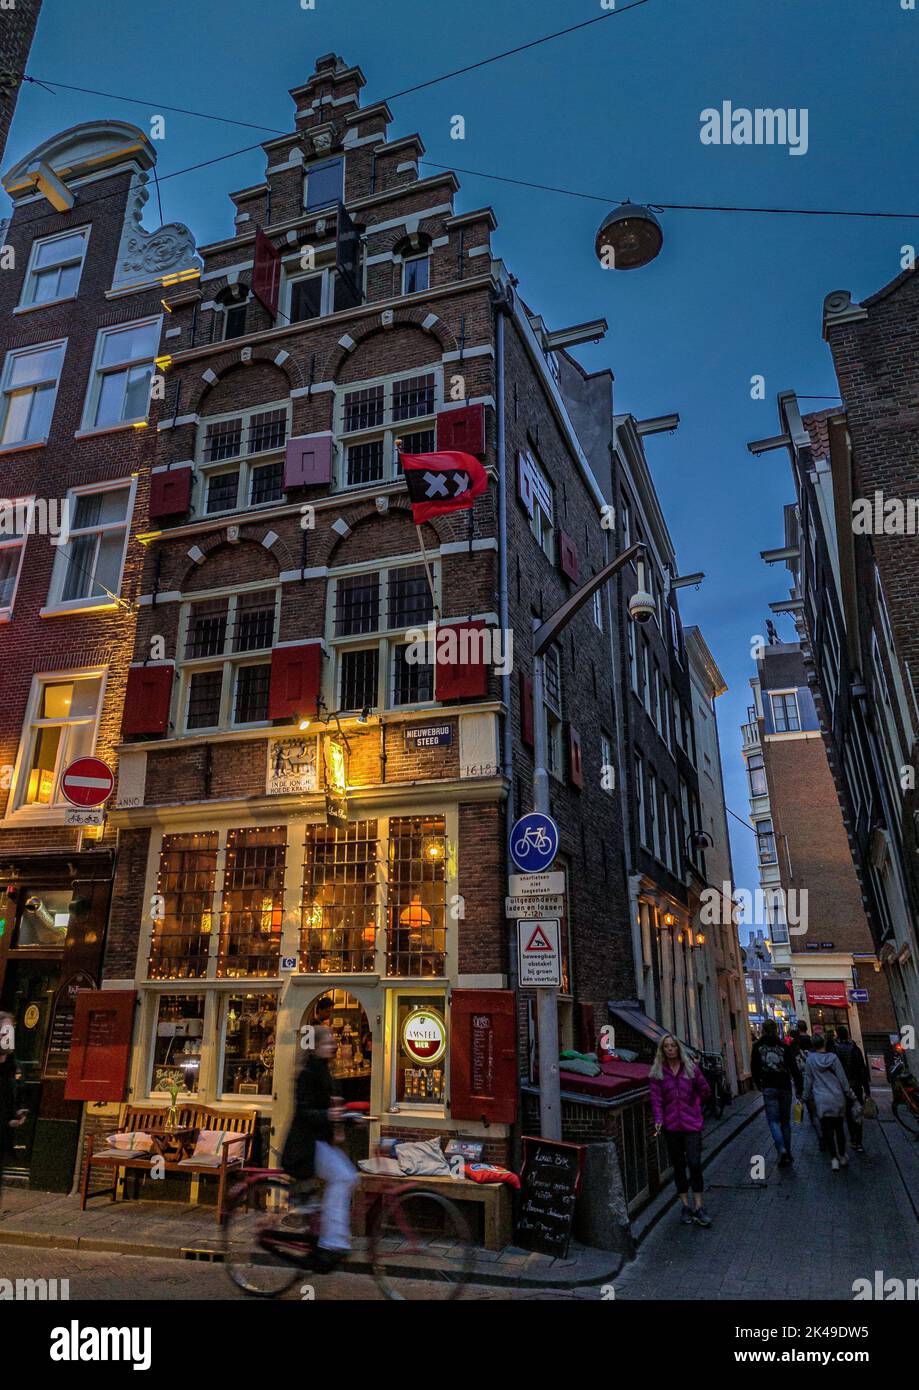 Amsterdam old town at night Stock Photo